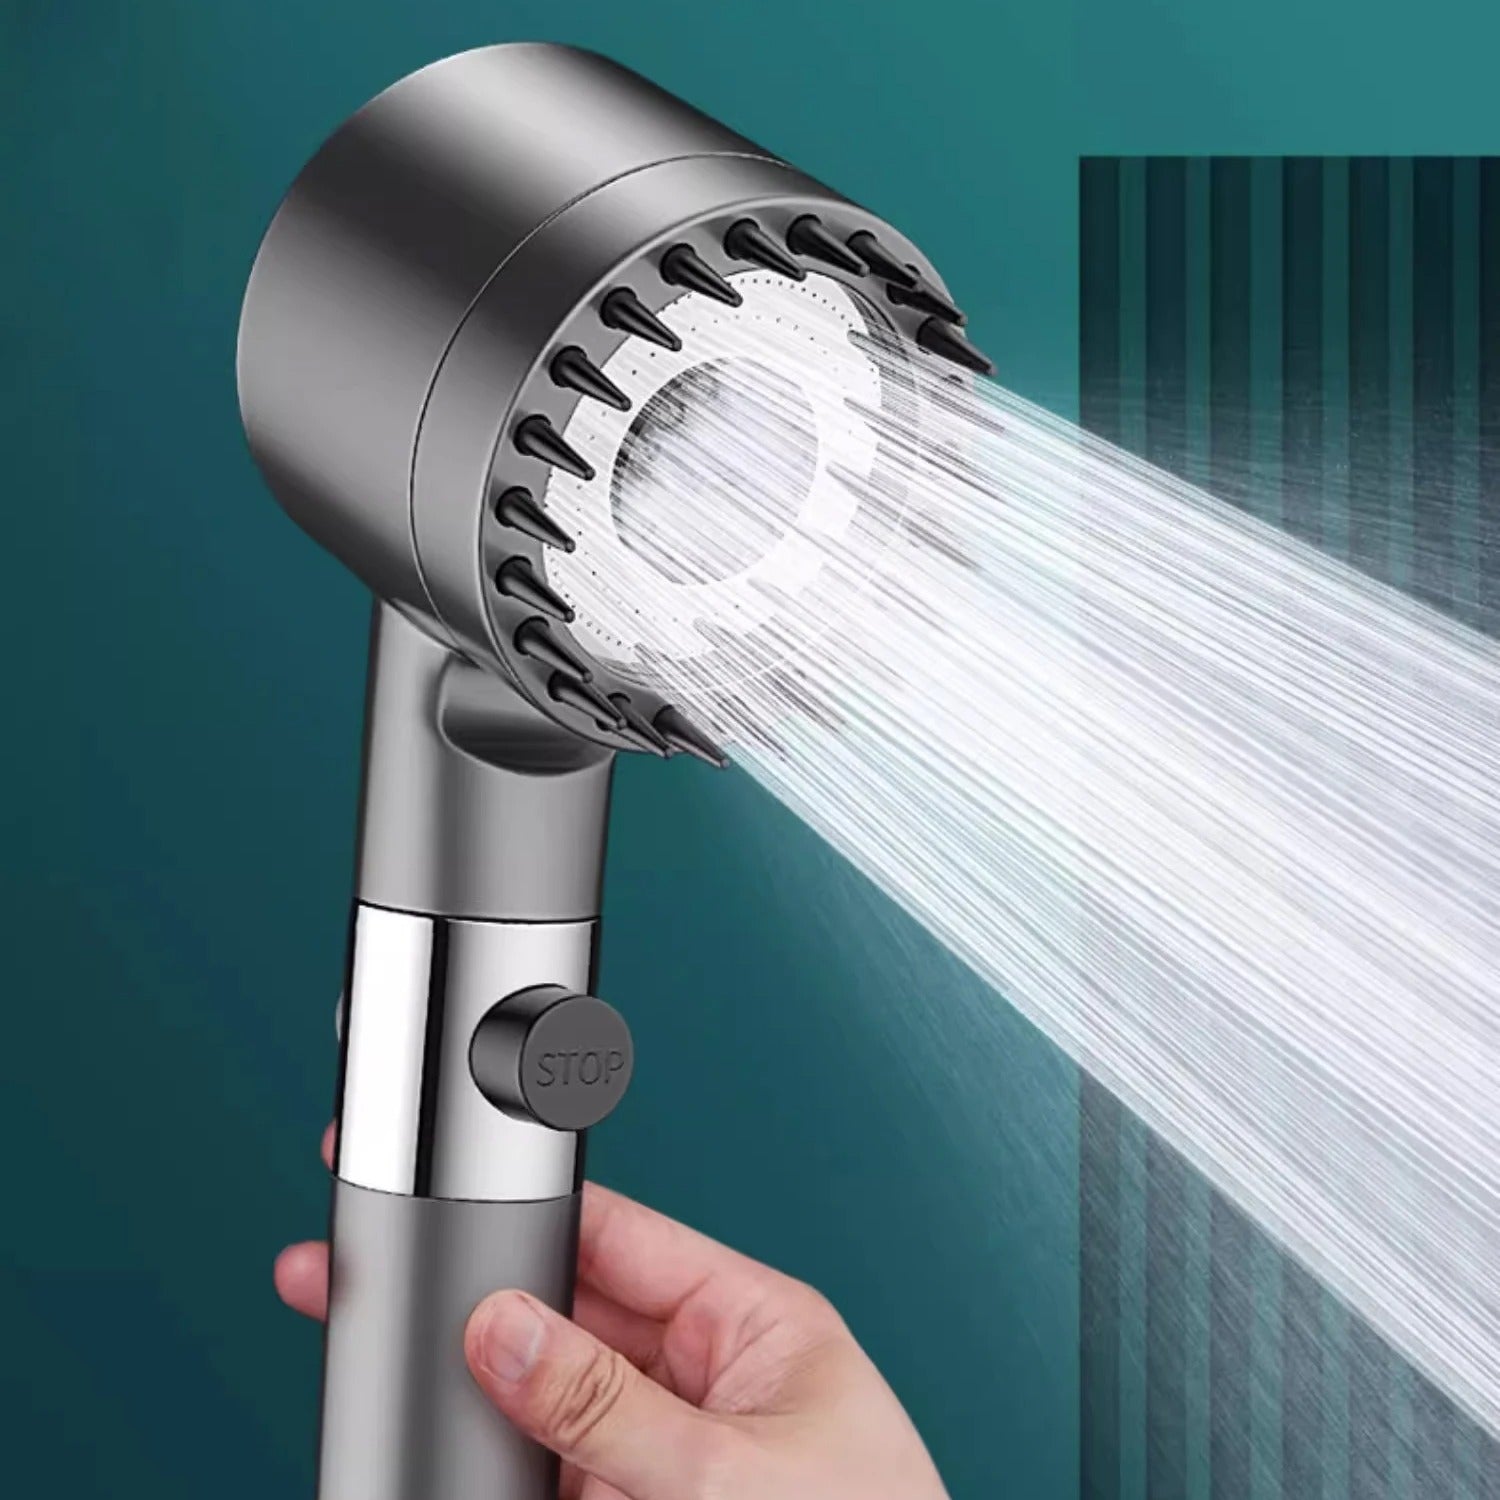 🔥30% OFF! High-Pressure Shower Head: 3 Modes, Portable with Filter